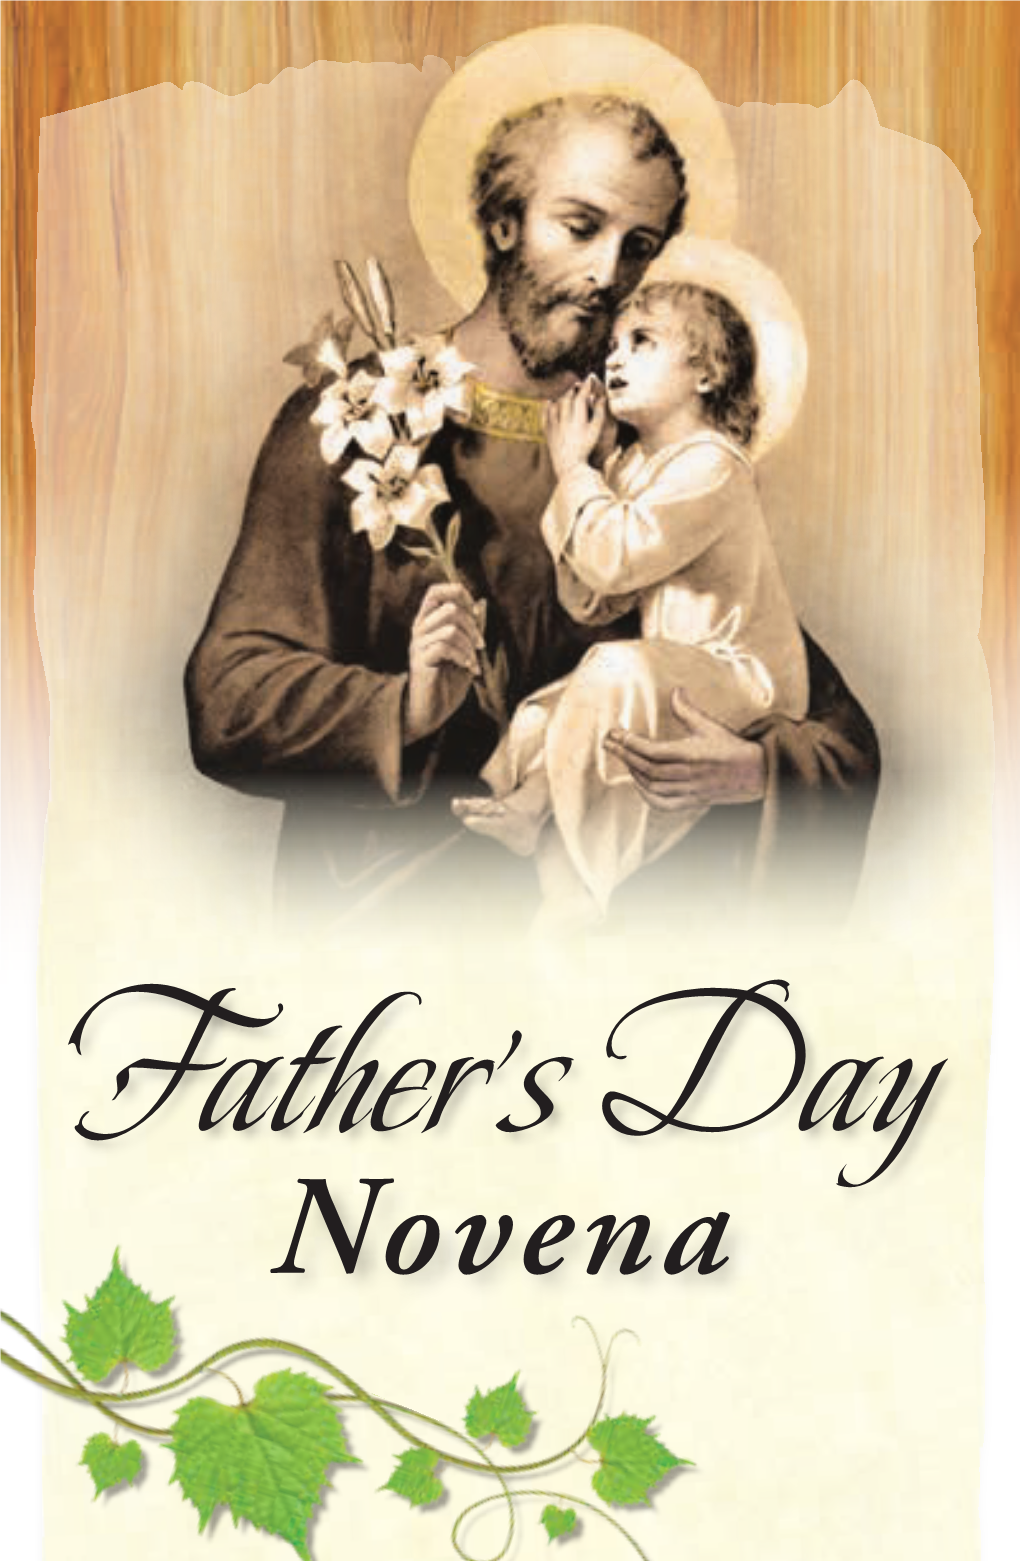 Father's Day Novena Day 1 a Man Shares in the Partnership of Creation with His Wife and God